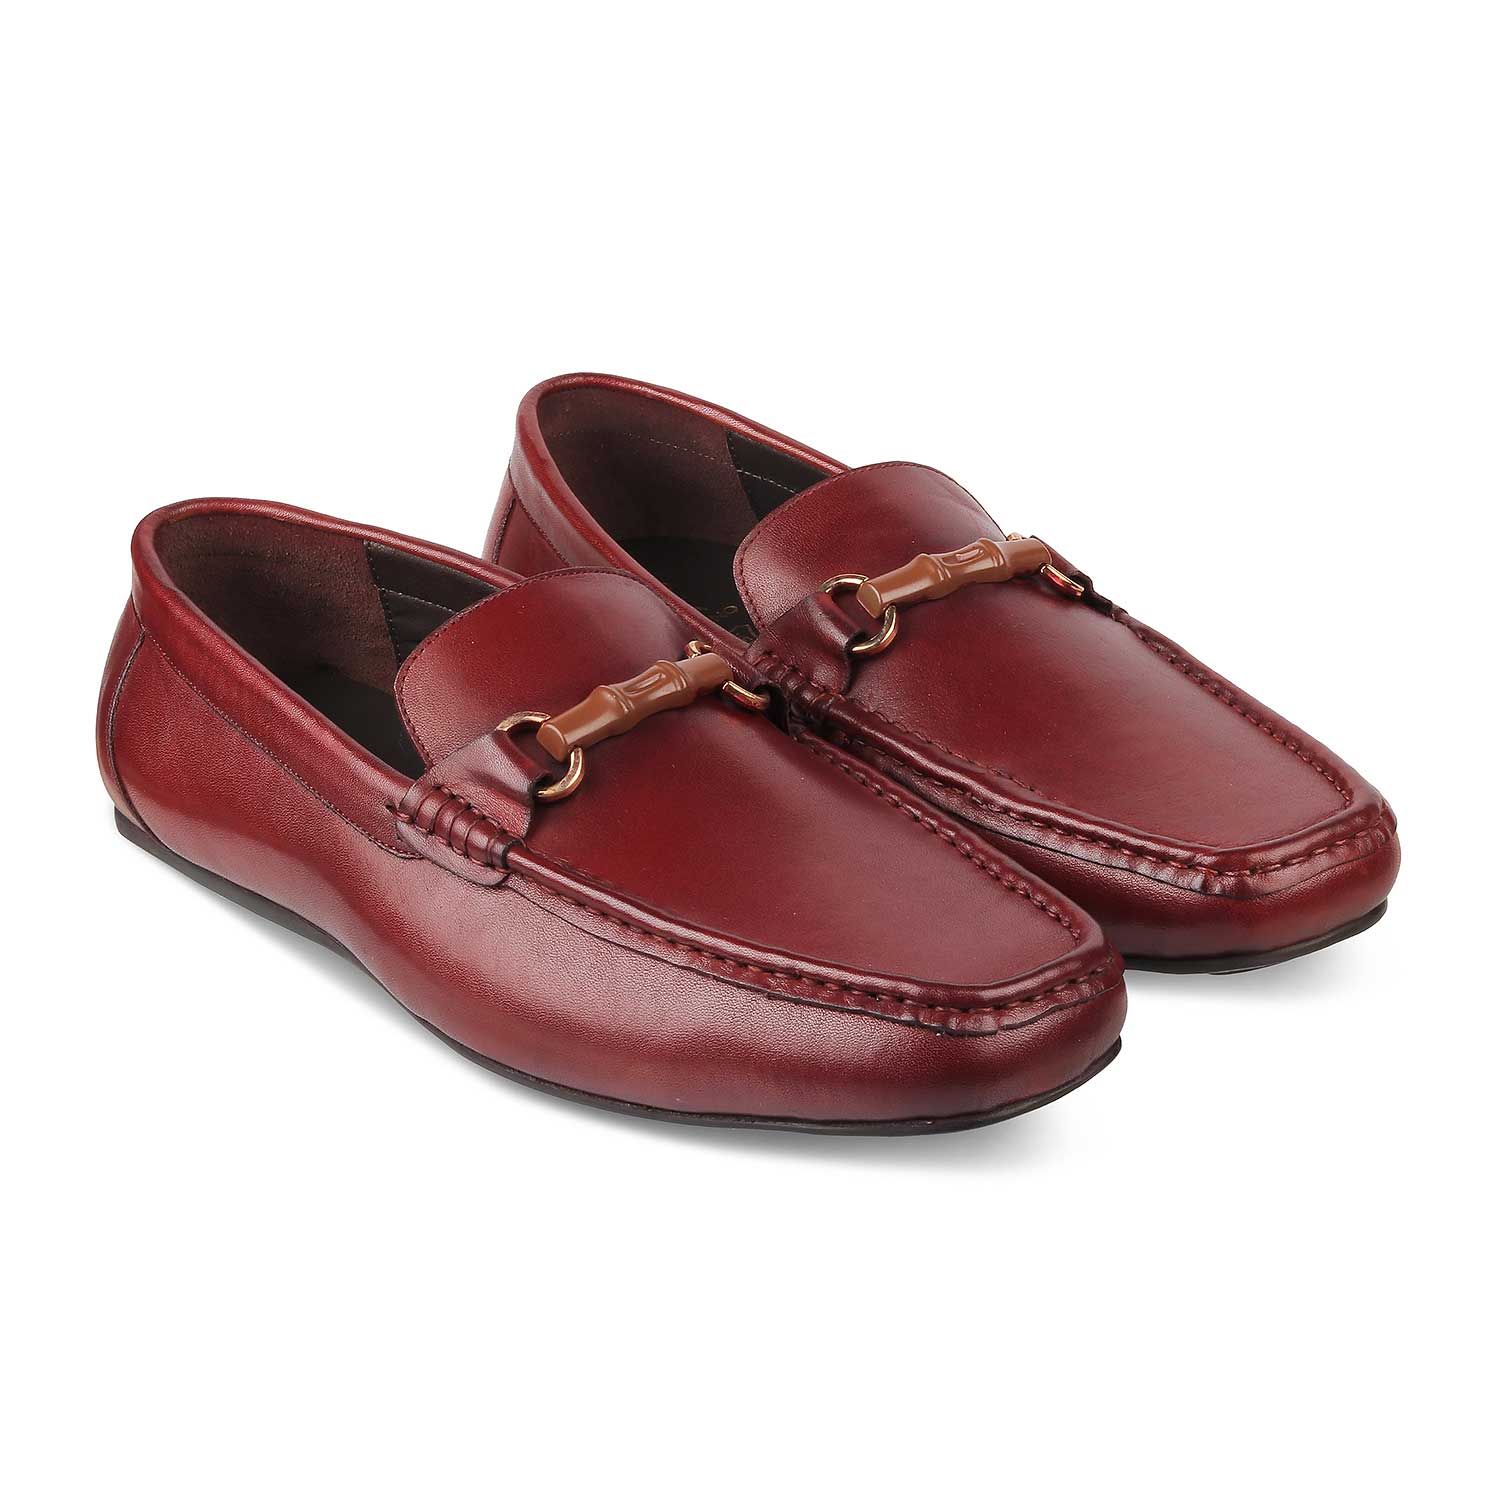 Tresmode-The Porter-2 Wine Men's Leather Loafers Tresmode-Tresmode